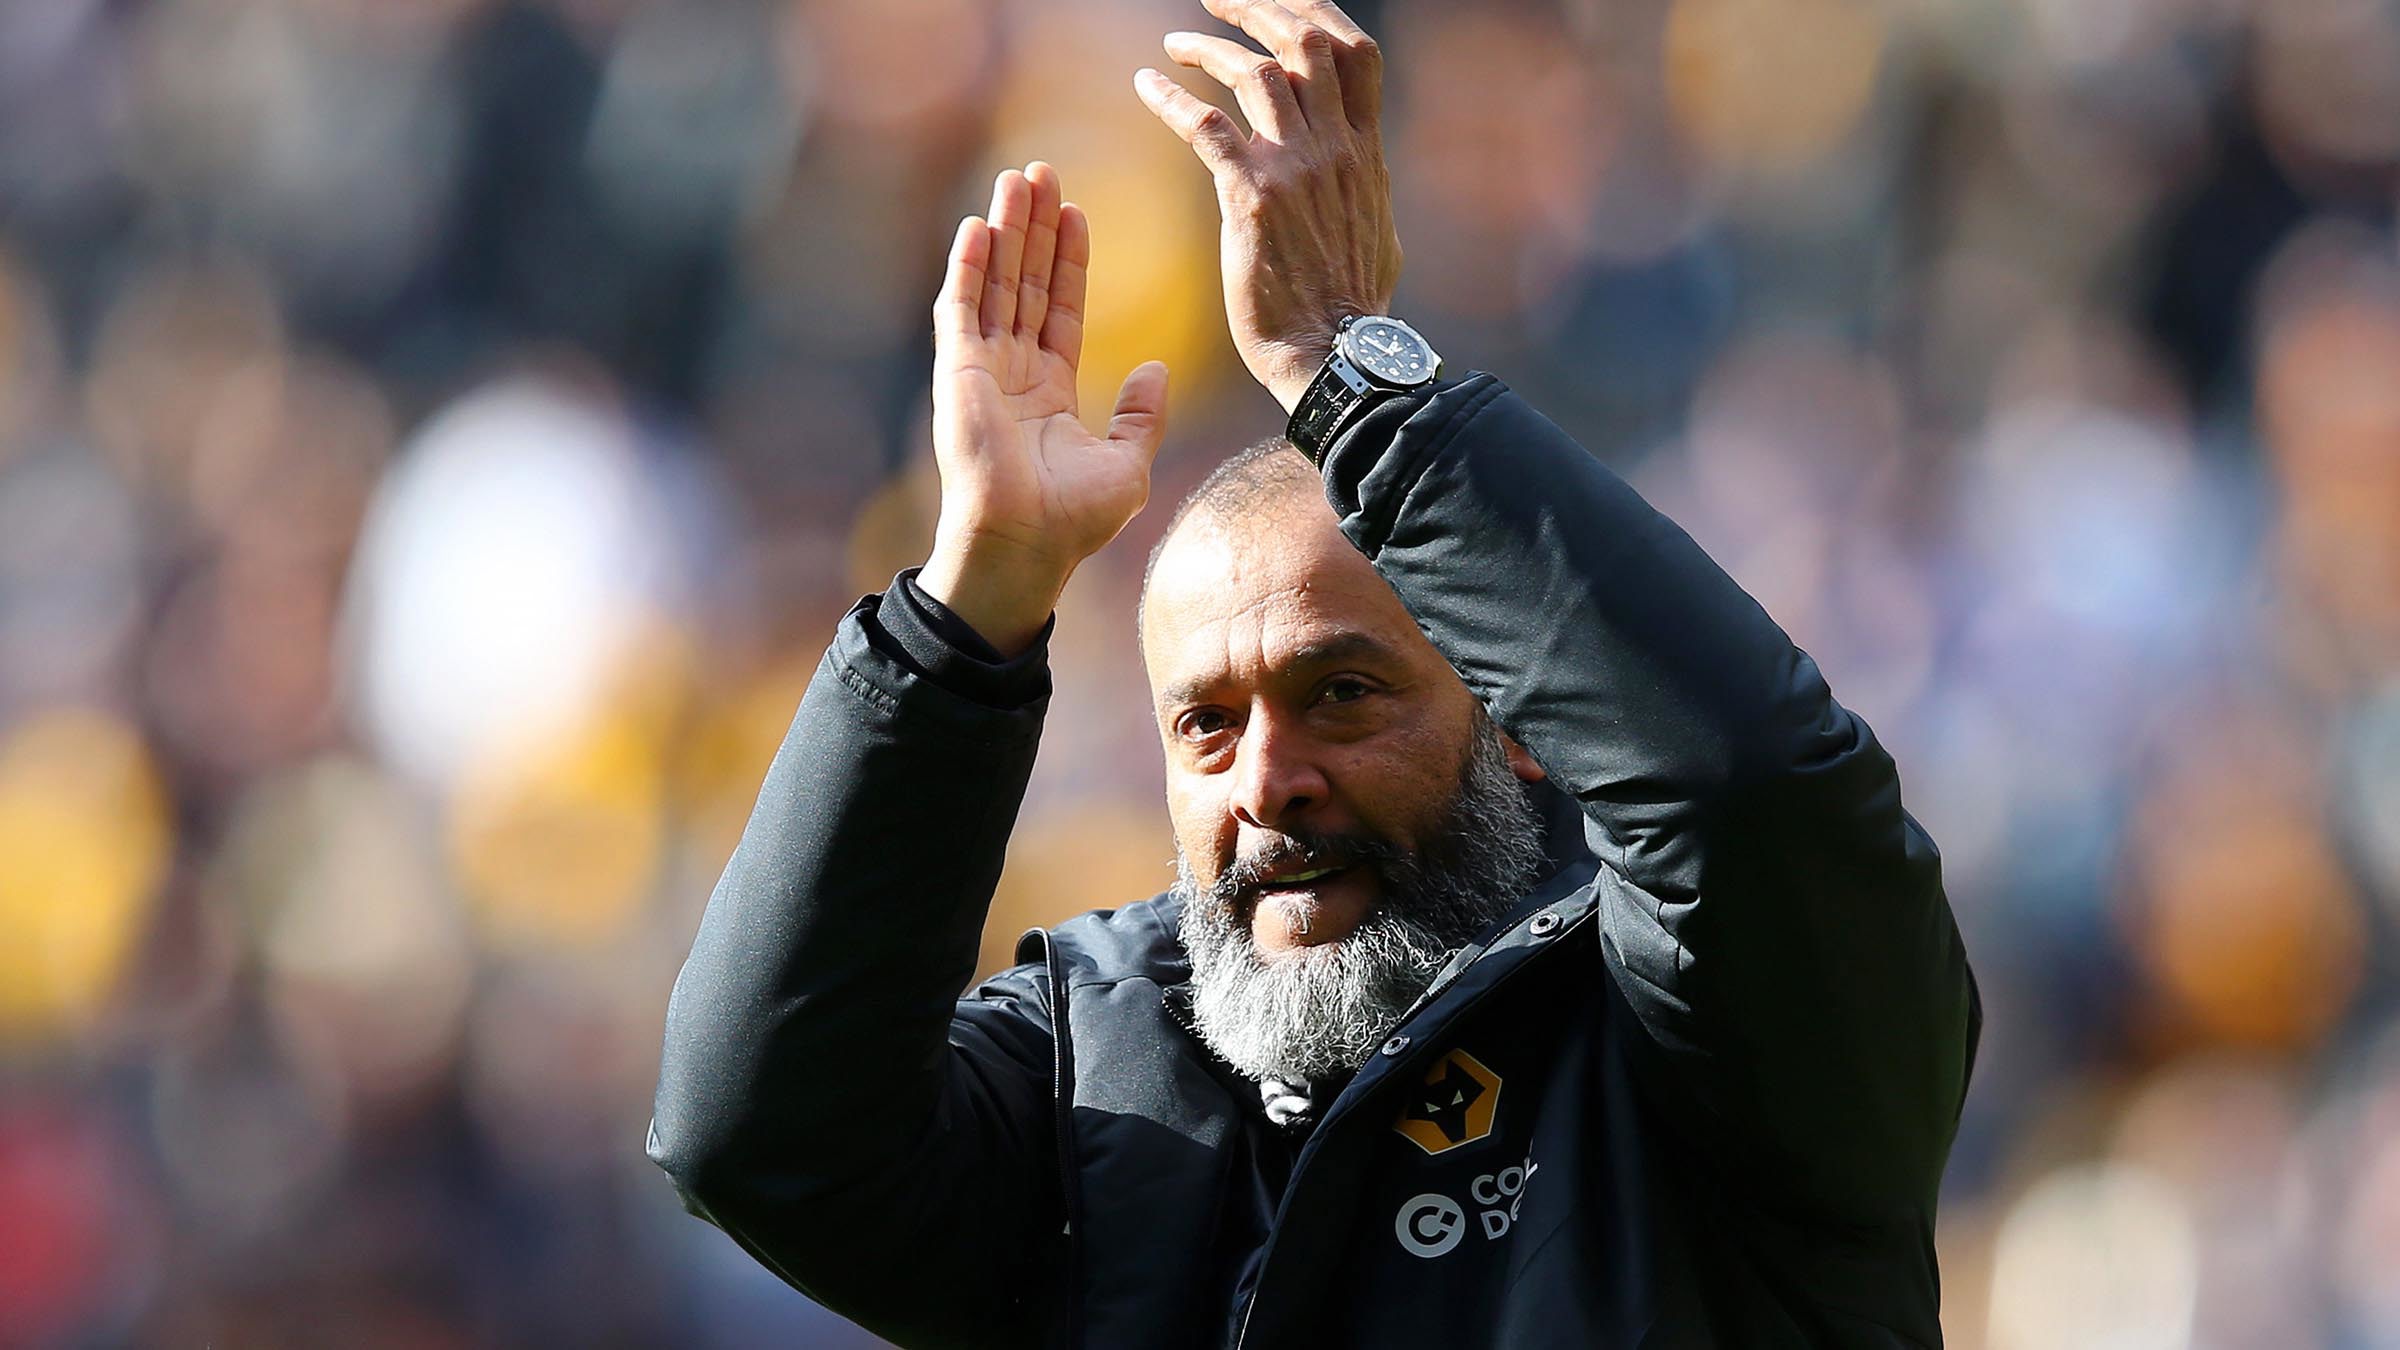 Nuno set to leave Wolves | Club | News | Wolverhampton Wanderers FC